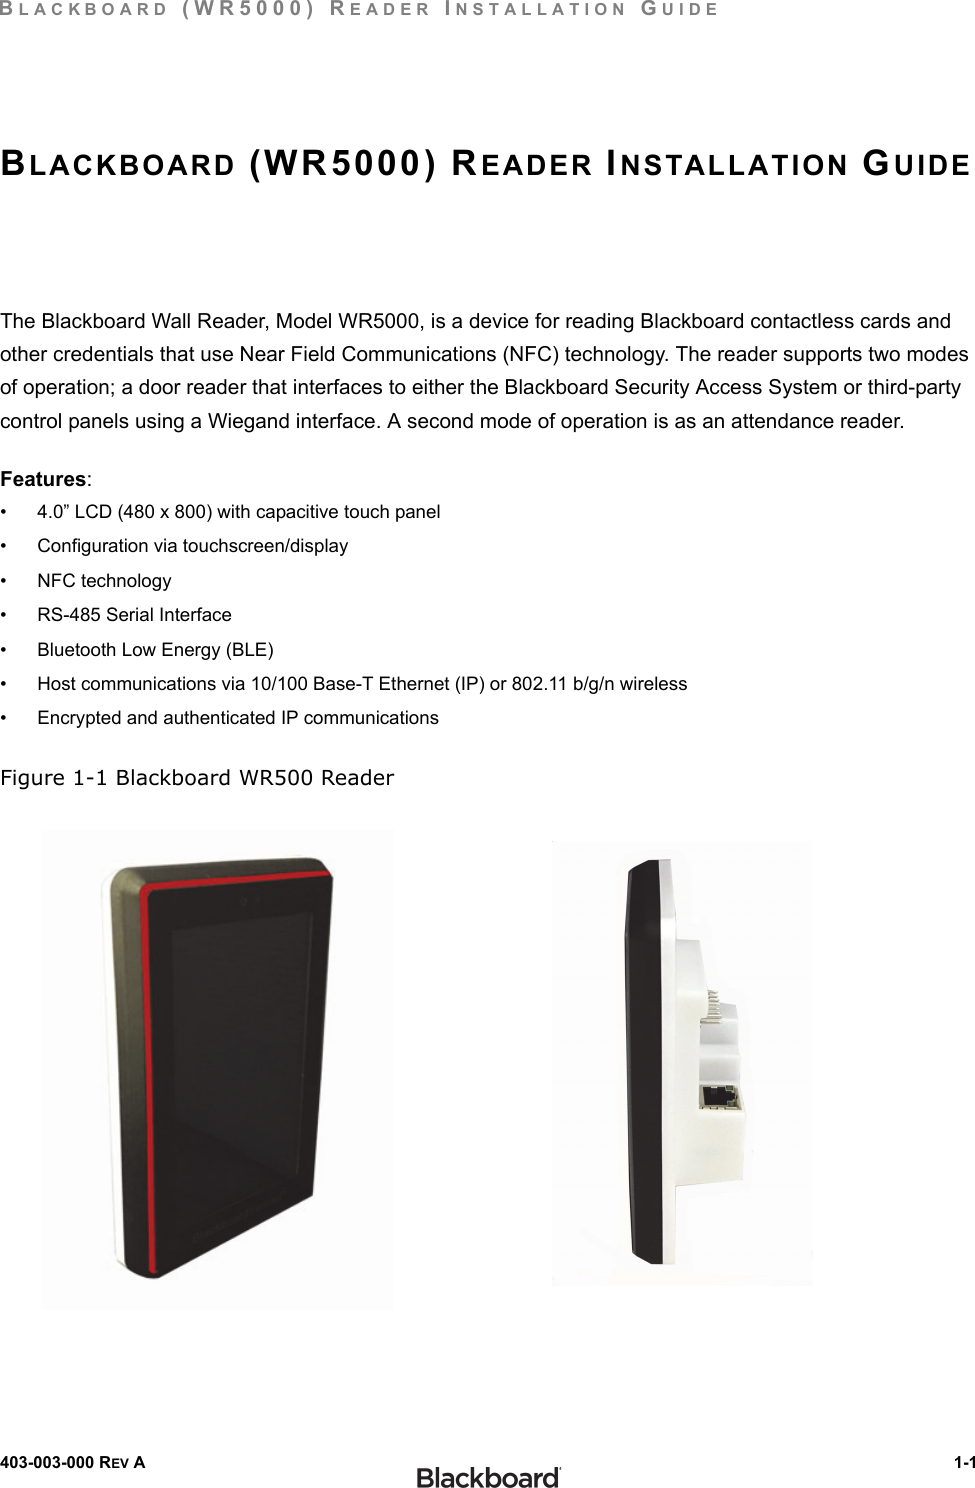 BLACKBOARD (WR5000) READER INSTALLATION GUIDE403-003-000 REV A  1-1BLACKBOARD (WR5000) READER INSTALLATION GUIDEThe Blackboard Wall Reader, Model WR5000, is a device for reading Blackboard contactless cards and other credentials that use Near Field Communications (NFC) technology. The reader supports two modes of operation; a door reader that interfaces to either the Blackboard Security Access System or third-party control panels using a Wiegand interface. A second mode of operation is as an attendance reader.Features:• 4.0” LCD (480 x 800) with capacitive touch panel• Configuration via touchscreen/display•NFC technology• RS-485 Serial Interface• Bluetooth Low Energy (BLE)• Host communications via 10/100 Base-T Ethernet (IP) or 802.11 b/g/n wireless• Encrypted and authenticated IP communicationsFigure 1-1 Blackboard WR500 Reader